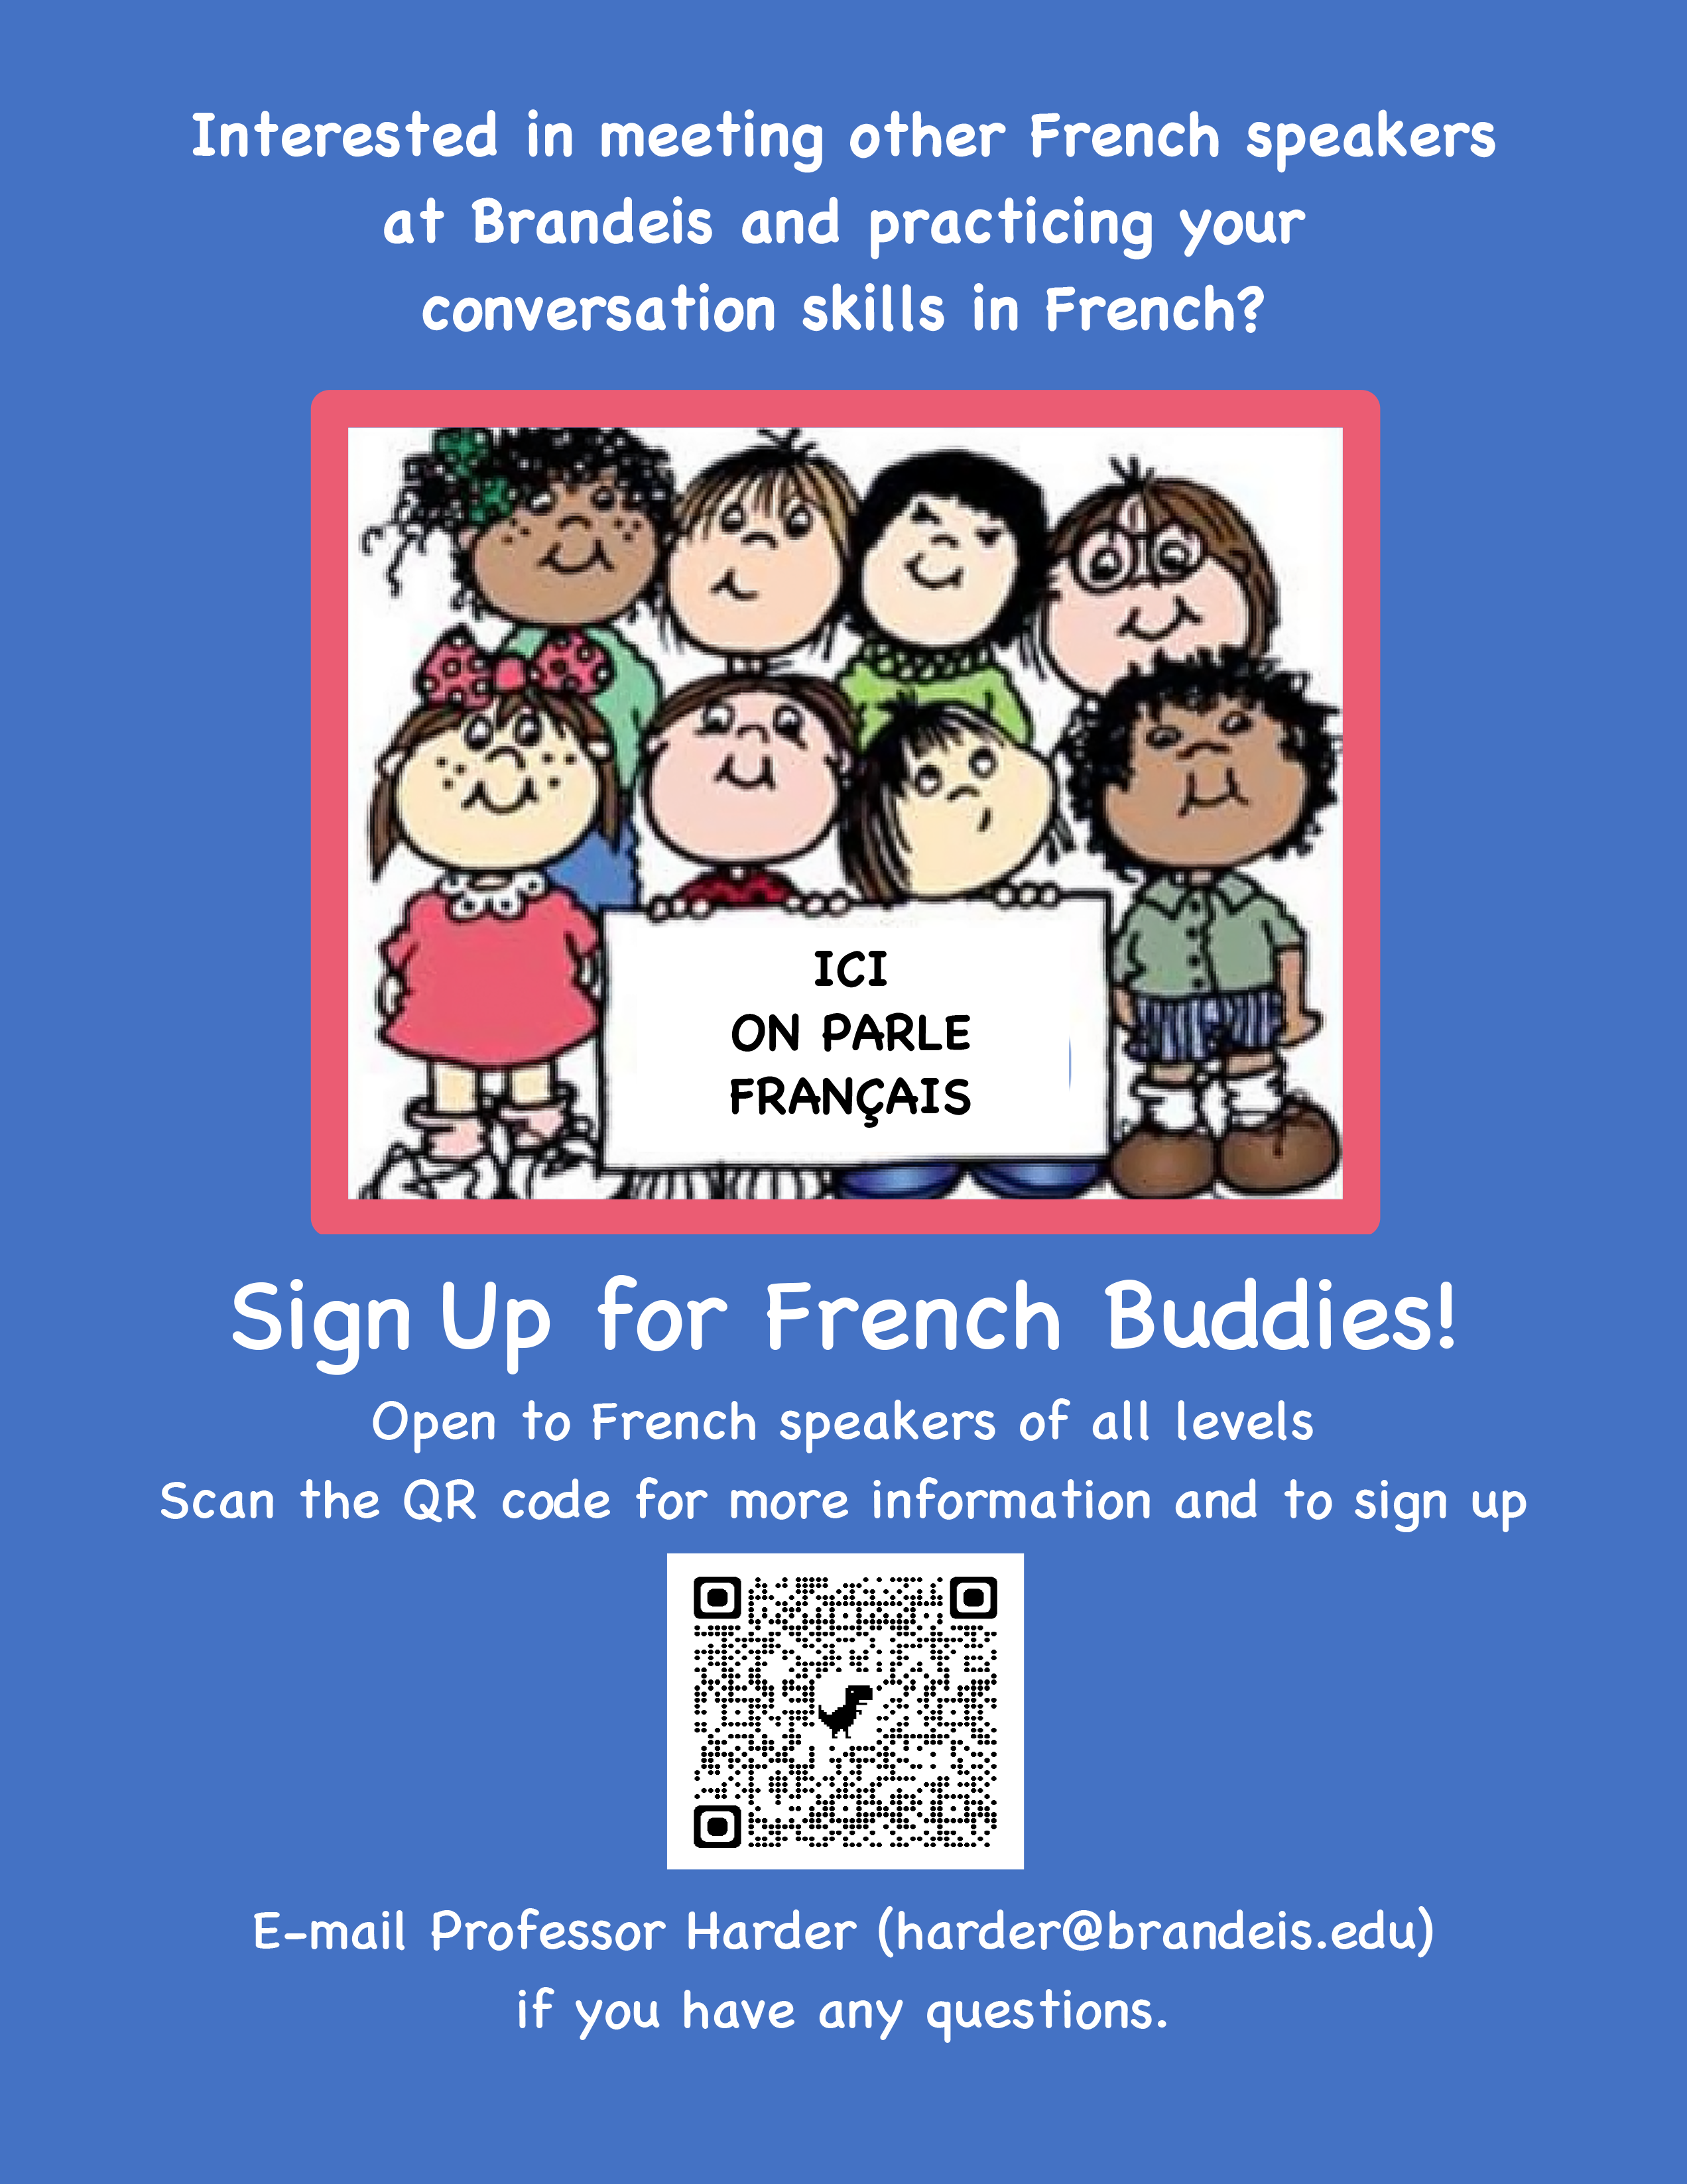 poster for French Buddies. cartoon image of students standing together holding a sign that says "ICI ON PARLE FRANCAIS". remainder of text reads same as on this page, to left